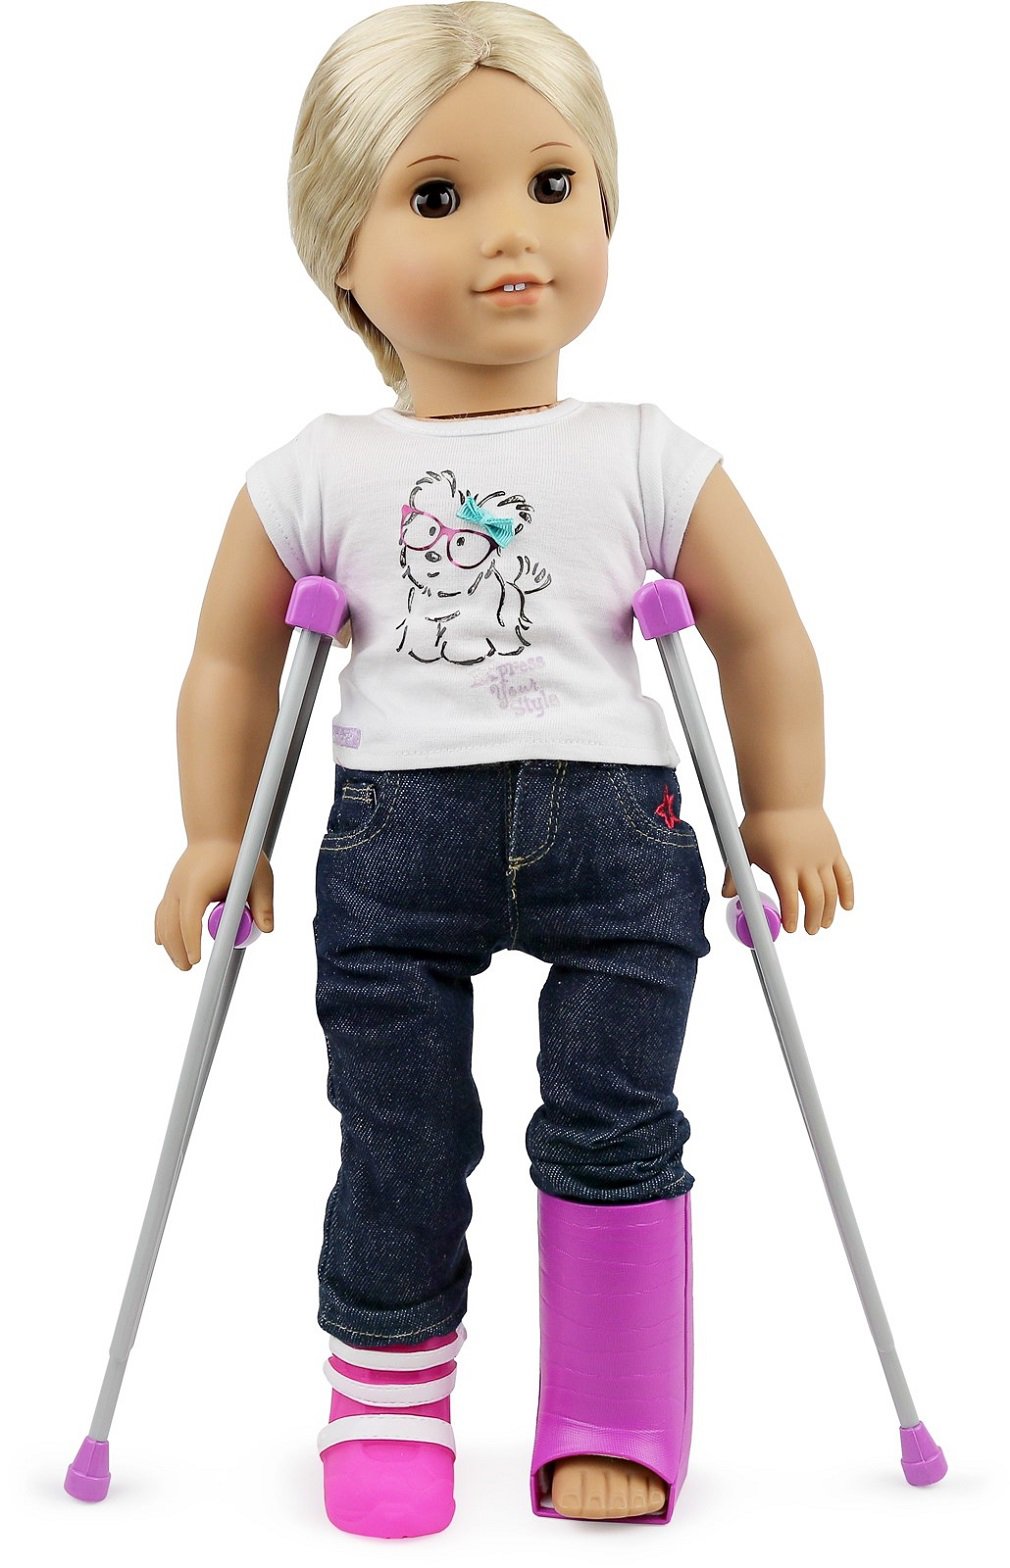 Click N' Play Doll Medical Play Set,5 Piece Set,Wheelchair,Crutches,Bandage,Leg/Arm Cast, Perfect For 18 Inch Dolls,Pink & Purple